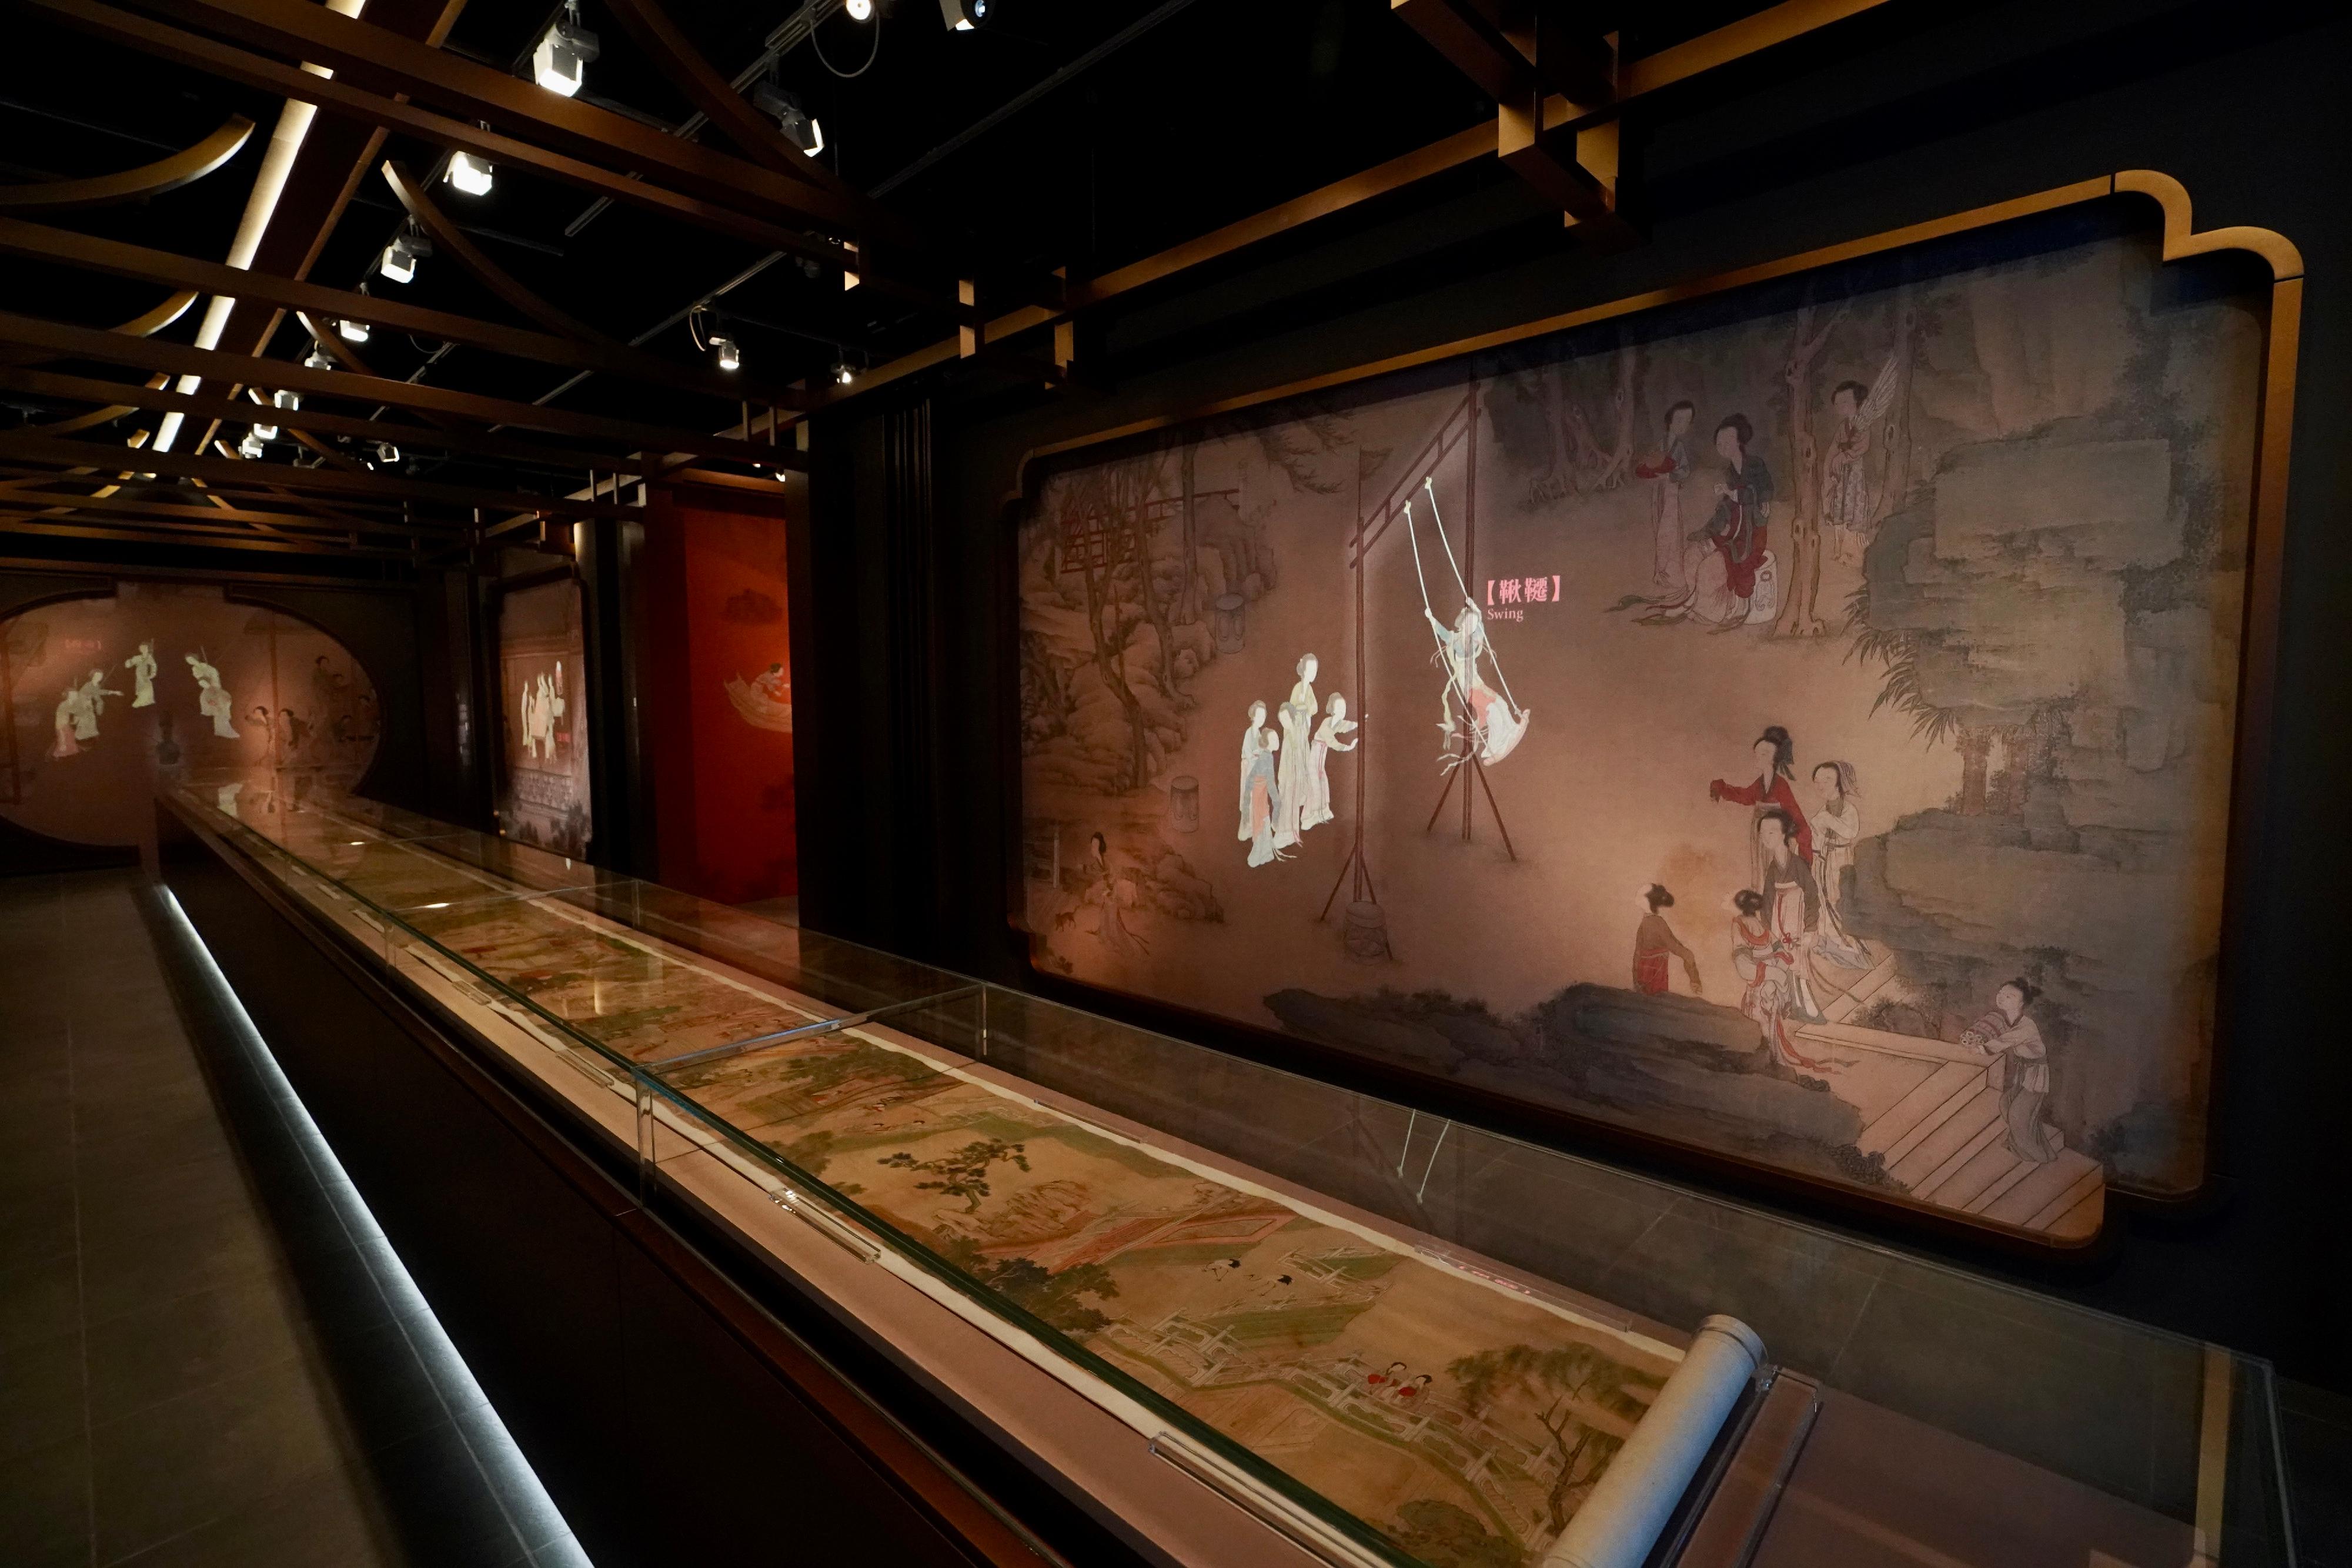 The opening ceremony for the exhibition "The Hong Kong Jockey Club Series: Women and Femininity in Ancient China - Treasures from the Nanjing Museum" was held today (November 29) at the Hong Kong Heritage Museum. Photo shows grade-one national treasure, Qing dynasty handscroll "Ancient court ladies at leisure", which depicts the lives of noble ladies in the court. 